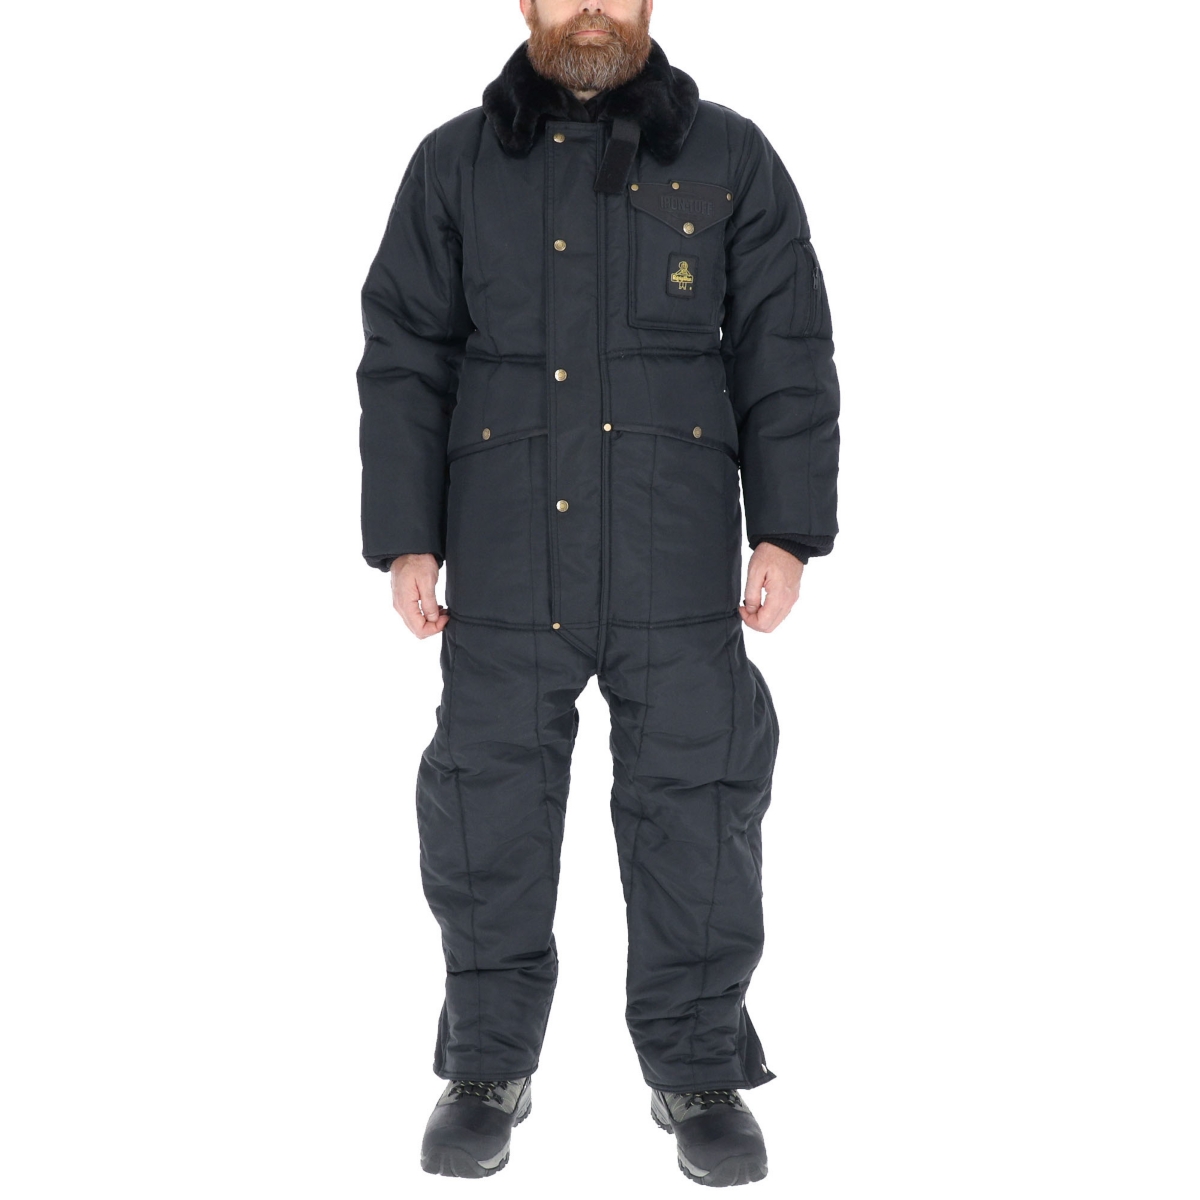 Big & Tall Iron-Tuff Insulated Coveralls with Hood -50F Cold Protection - Sage